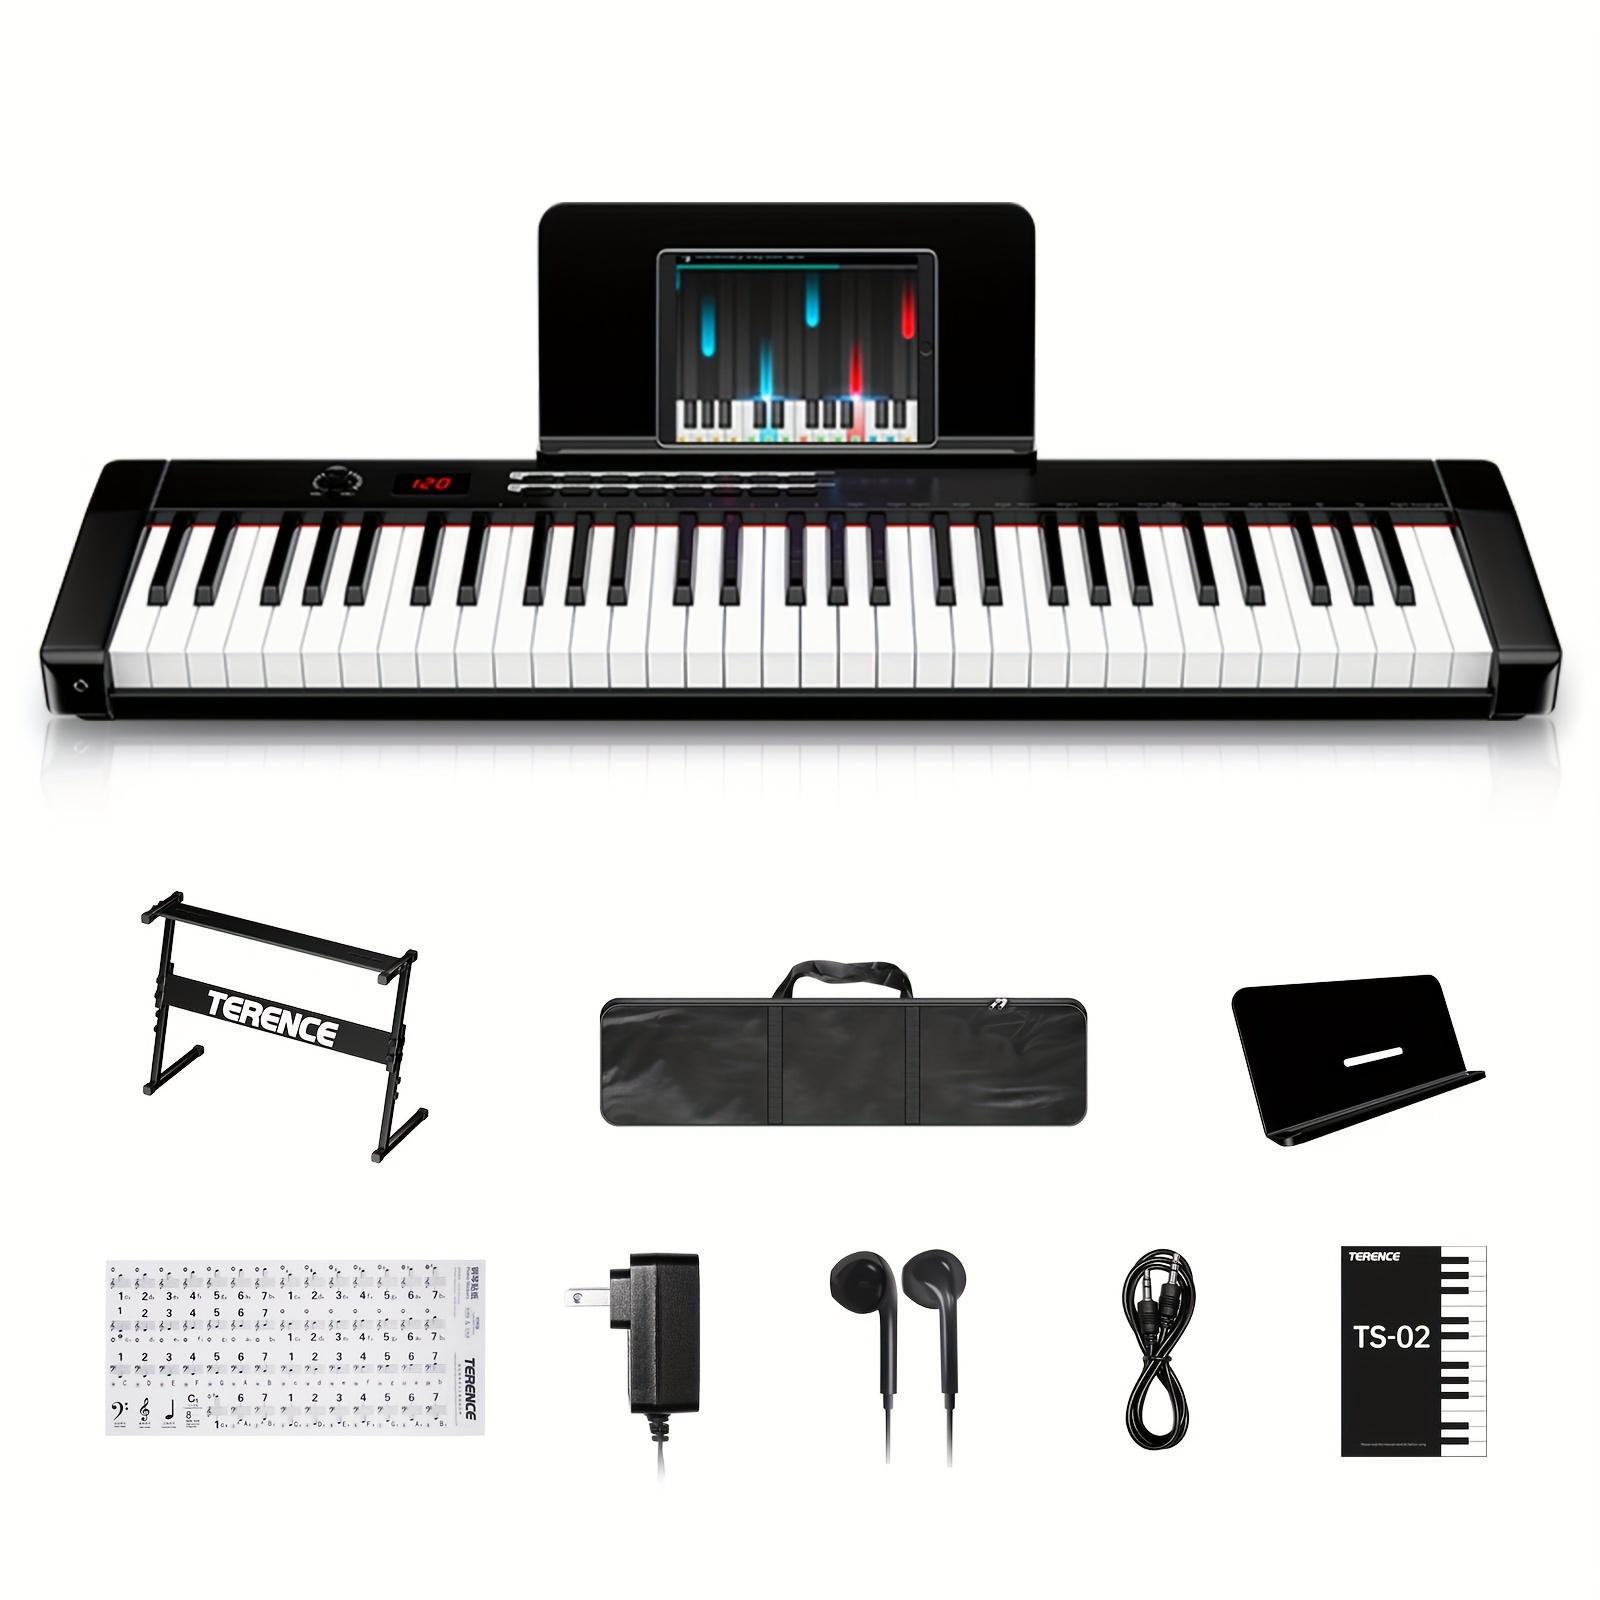 

Terence Keyboard Piano With 61 Semi-weighted Keys Lcd Display & 1800mah Battery Support Midi Usb Interface With Sheet Music Stand Sticker Bag Audio Cable Earphones